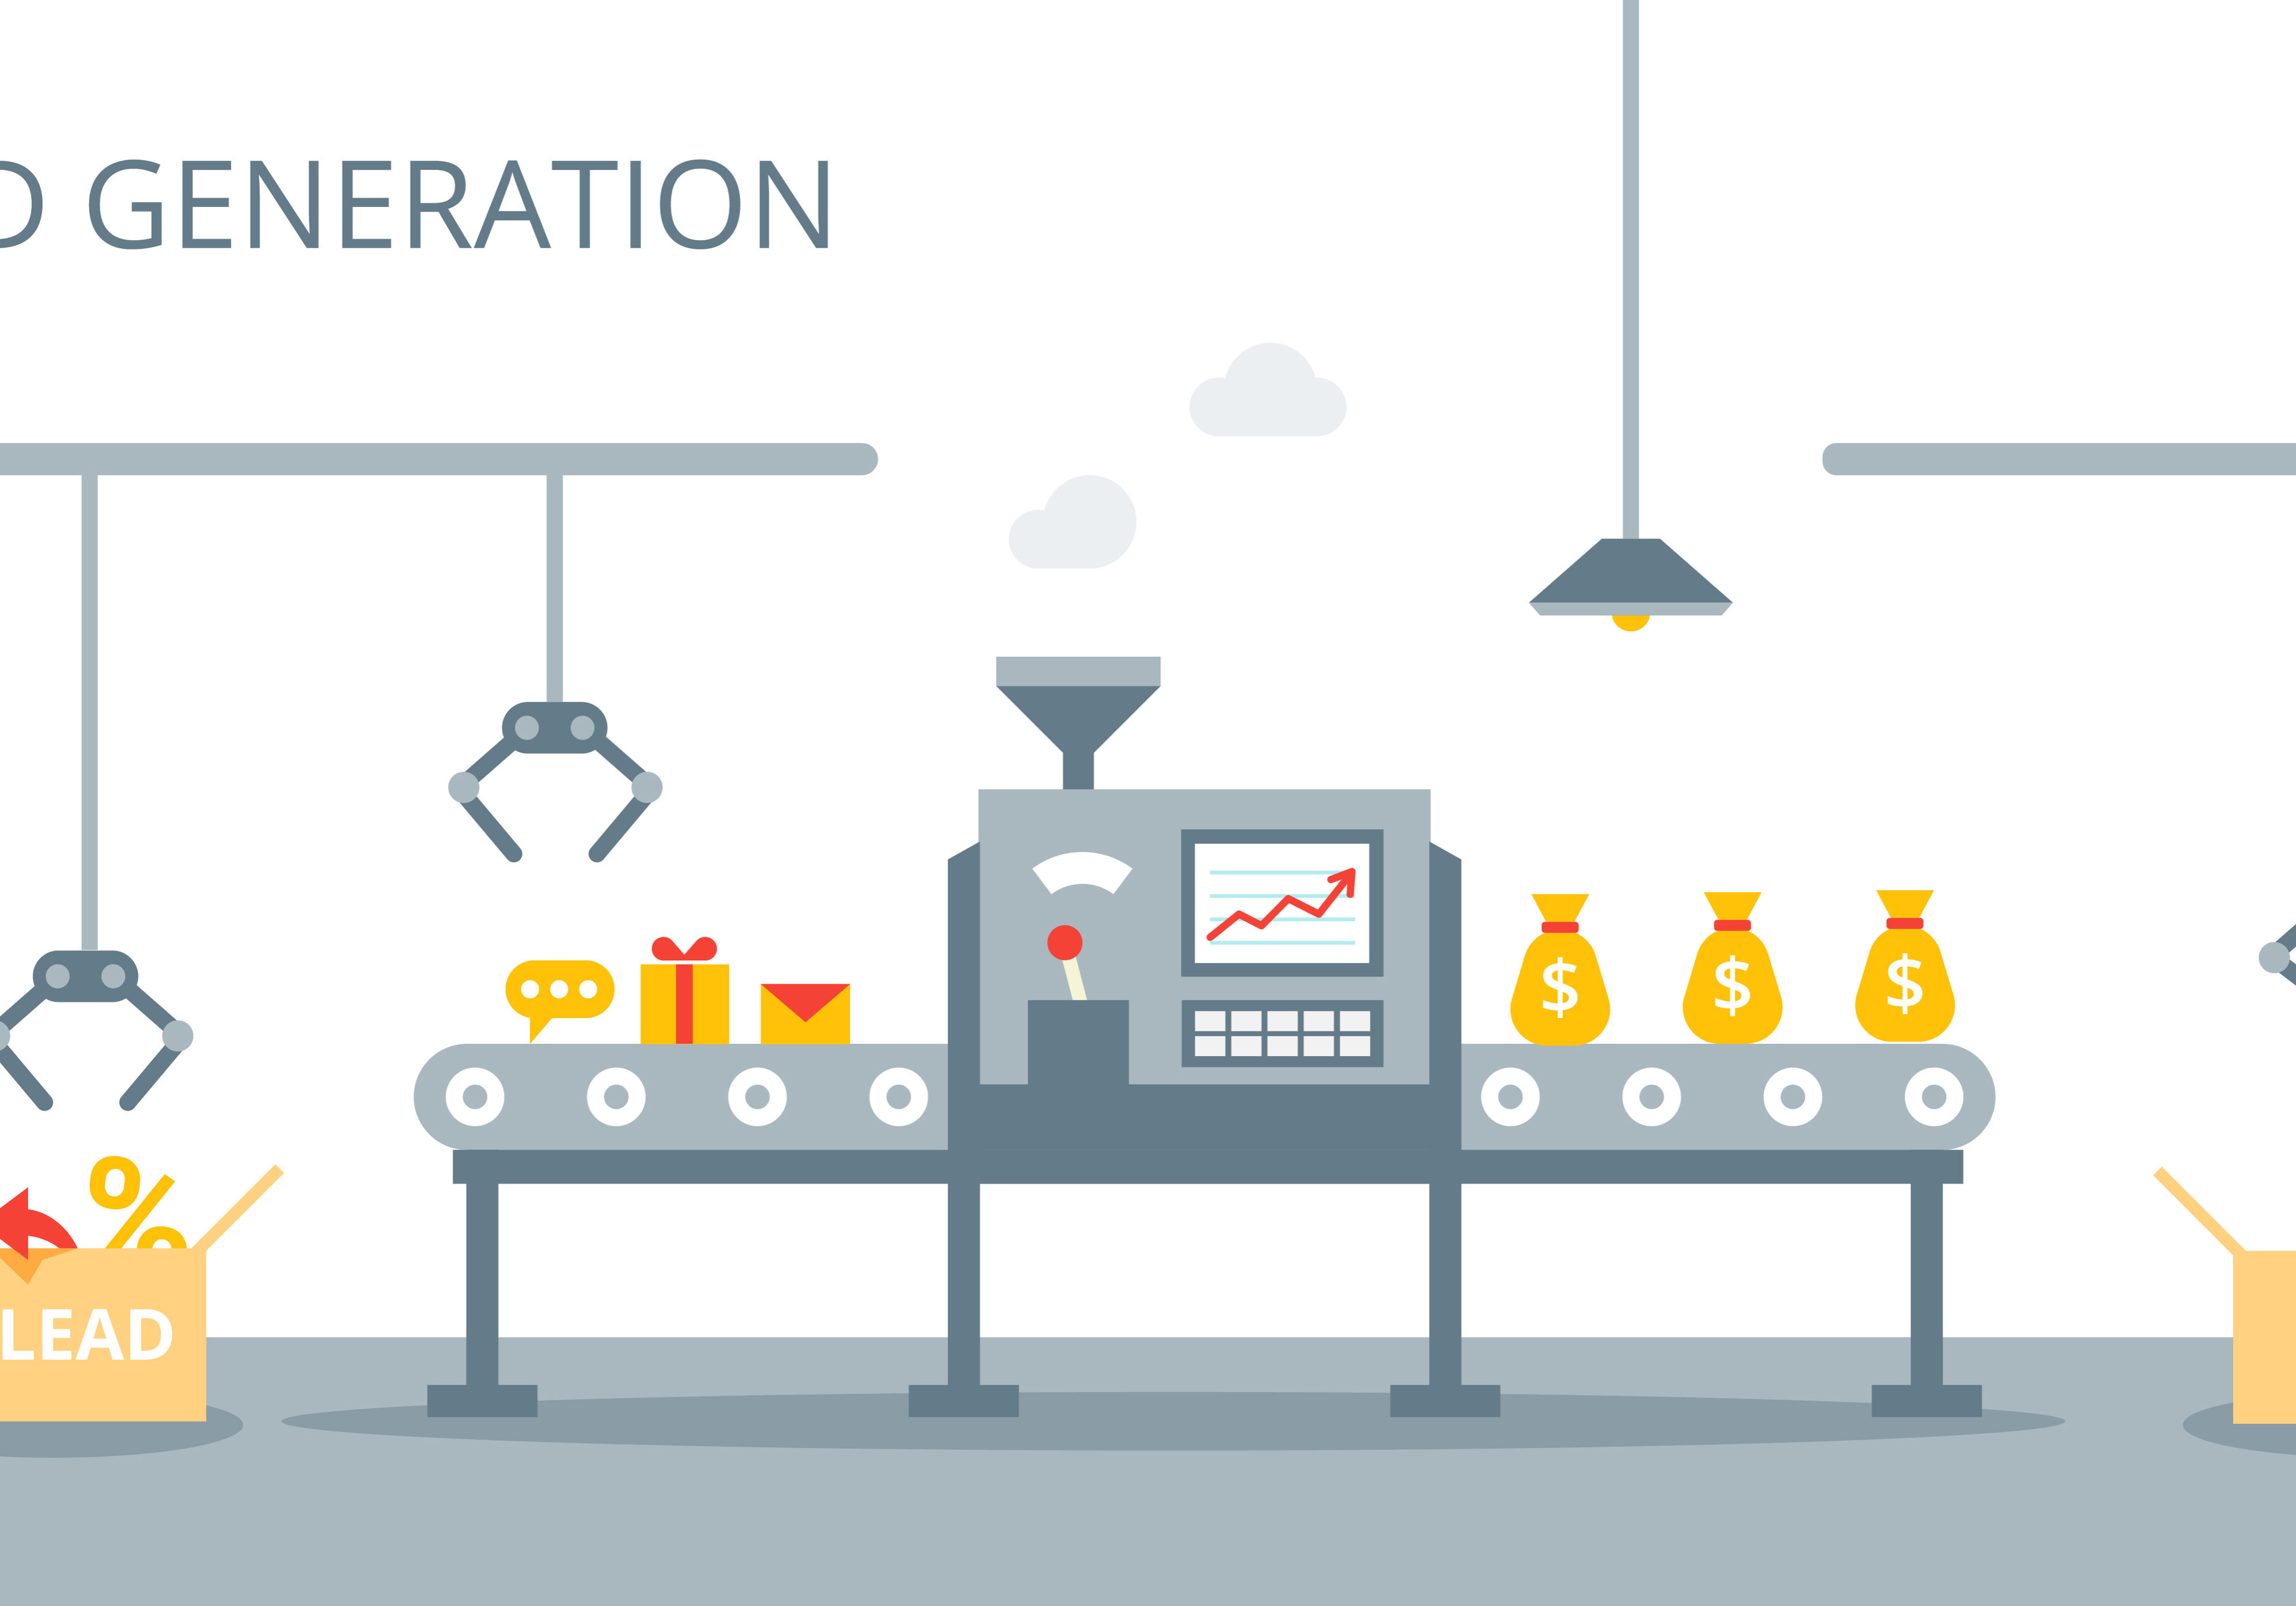 Lead generation vector concept. Process of leads production on the conveyor belt. Marketing concept in flat style.